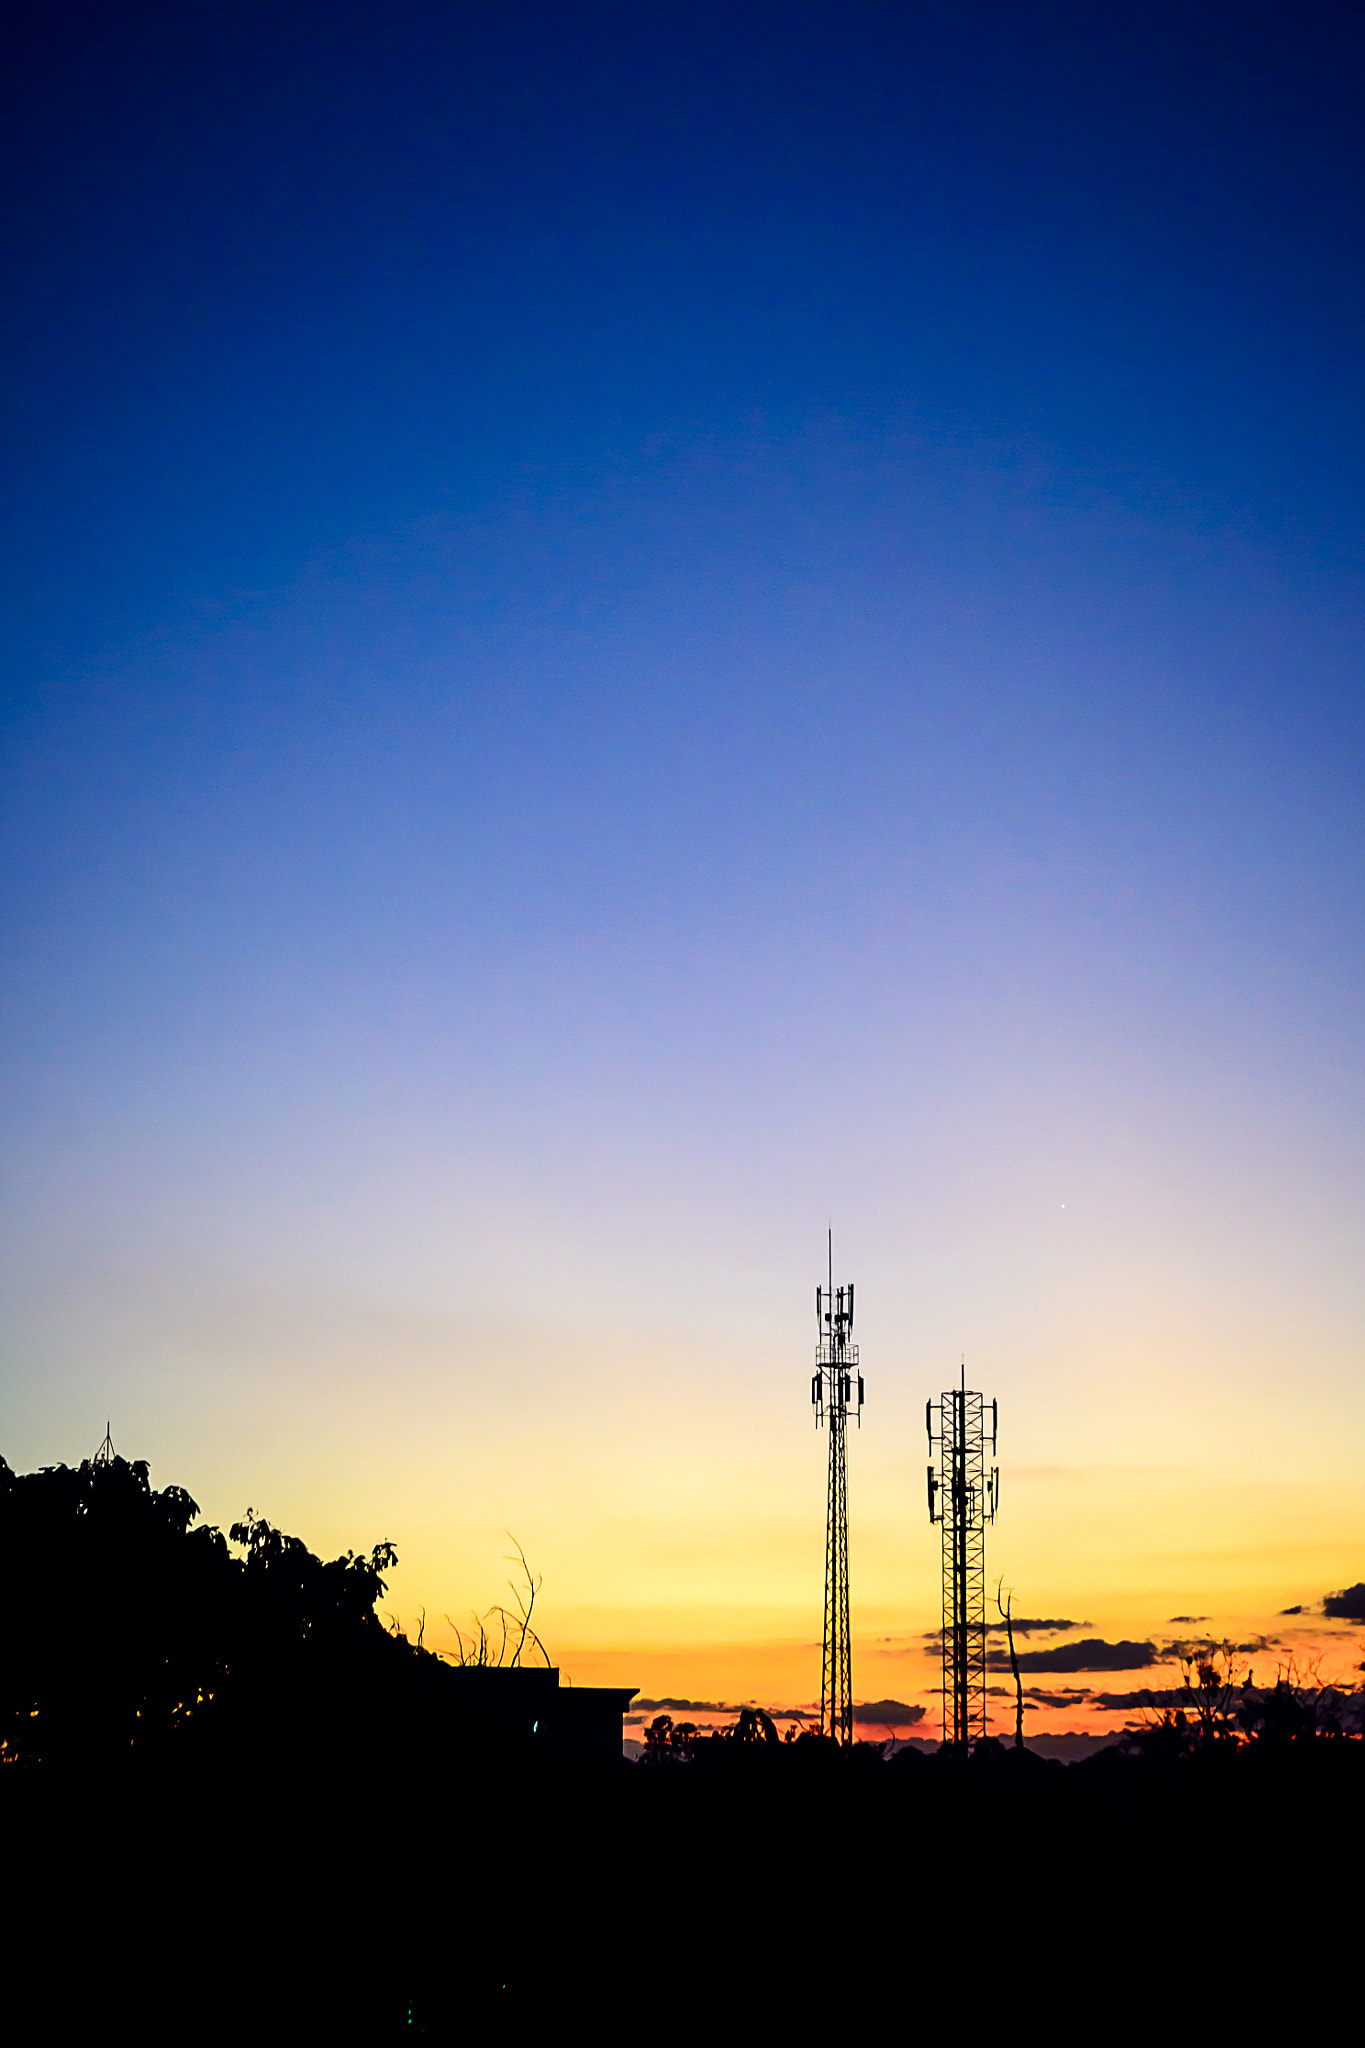 sunset sky with silhouette antenna